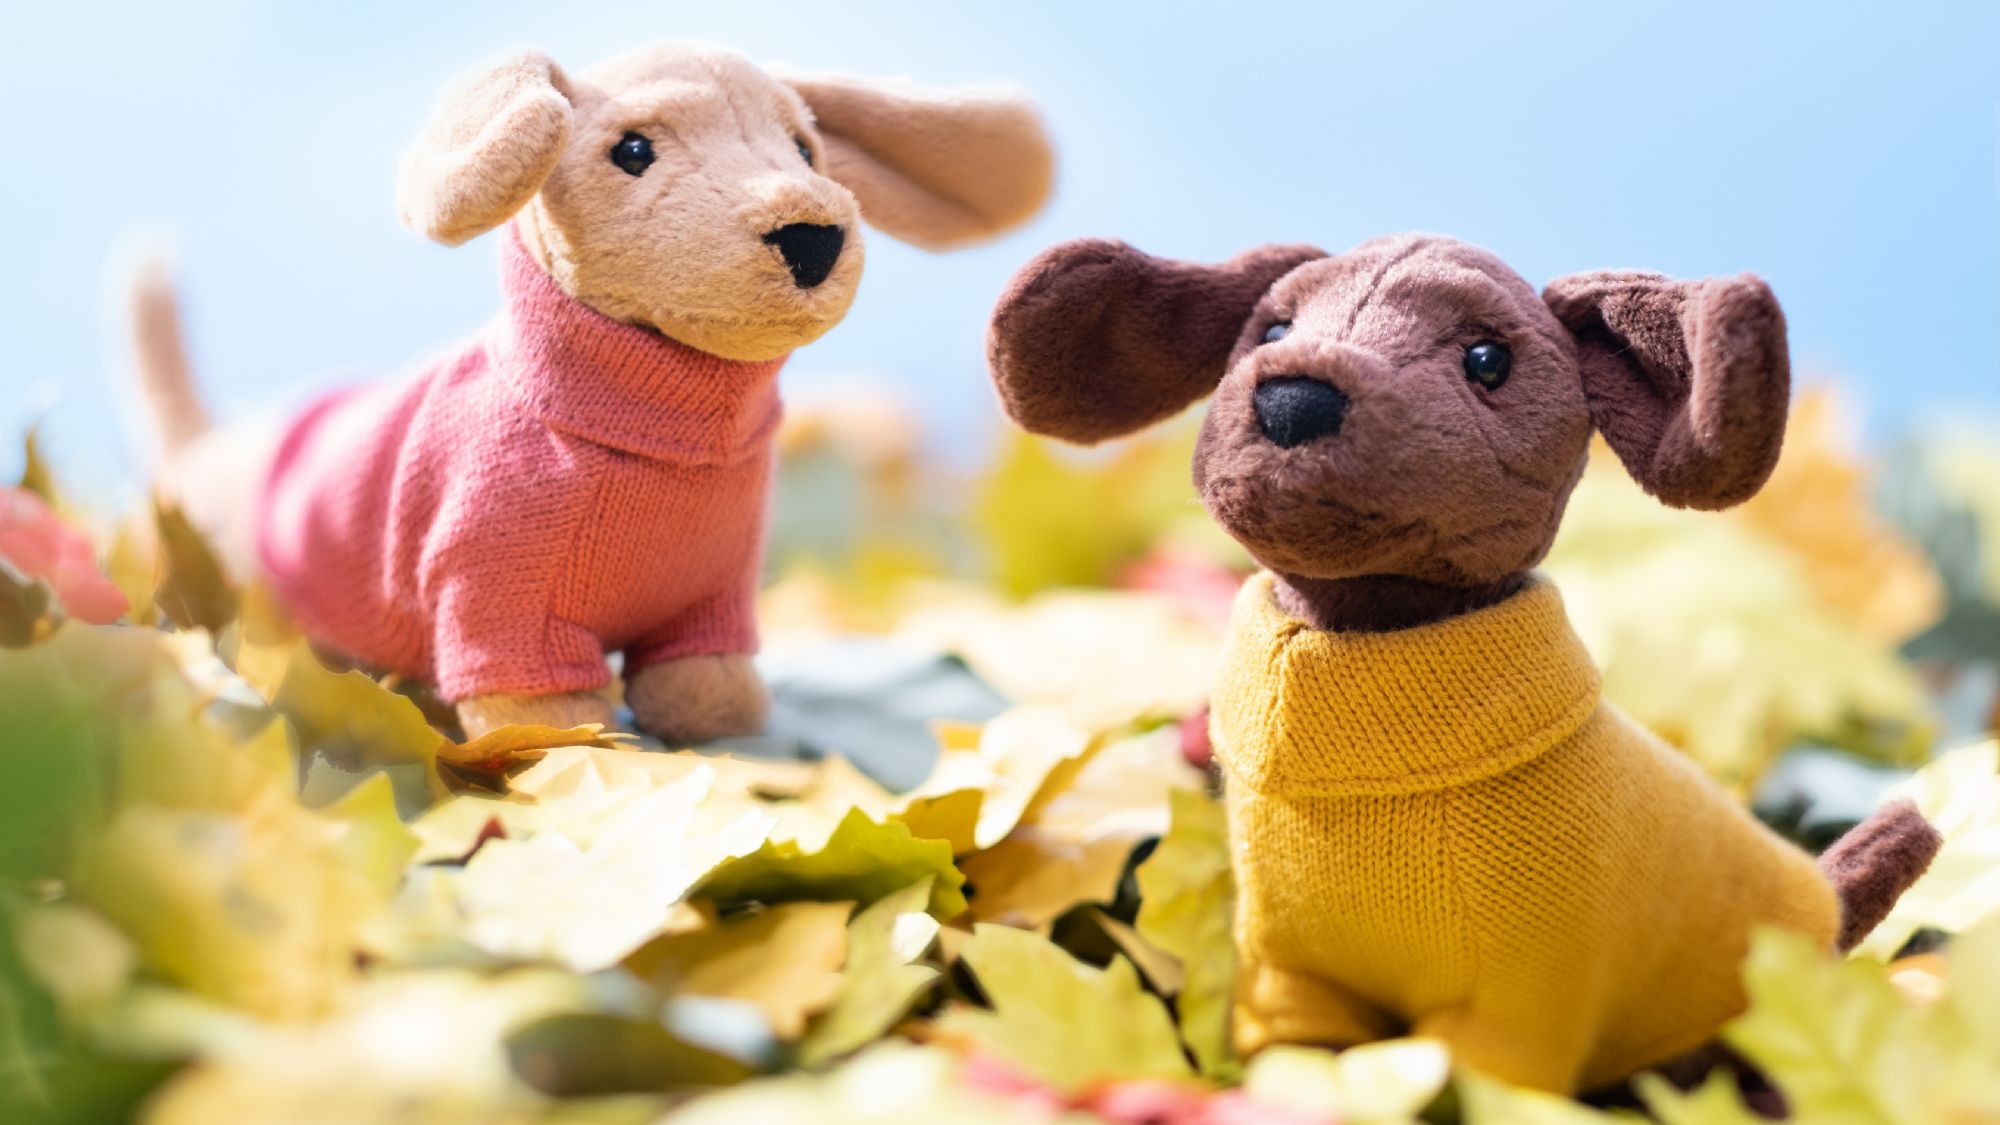 The Official Jellycat Site | Jellycat